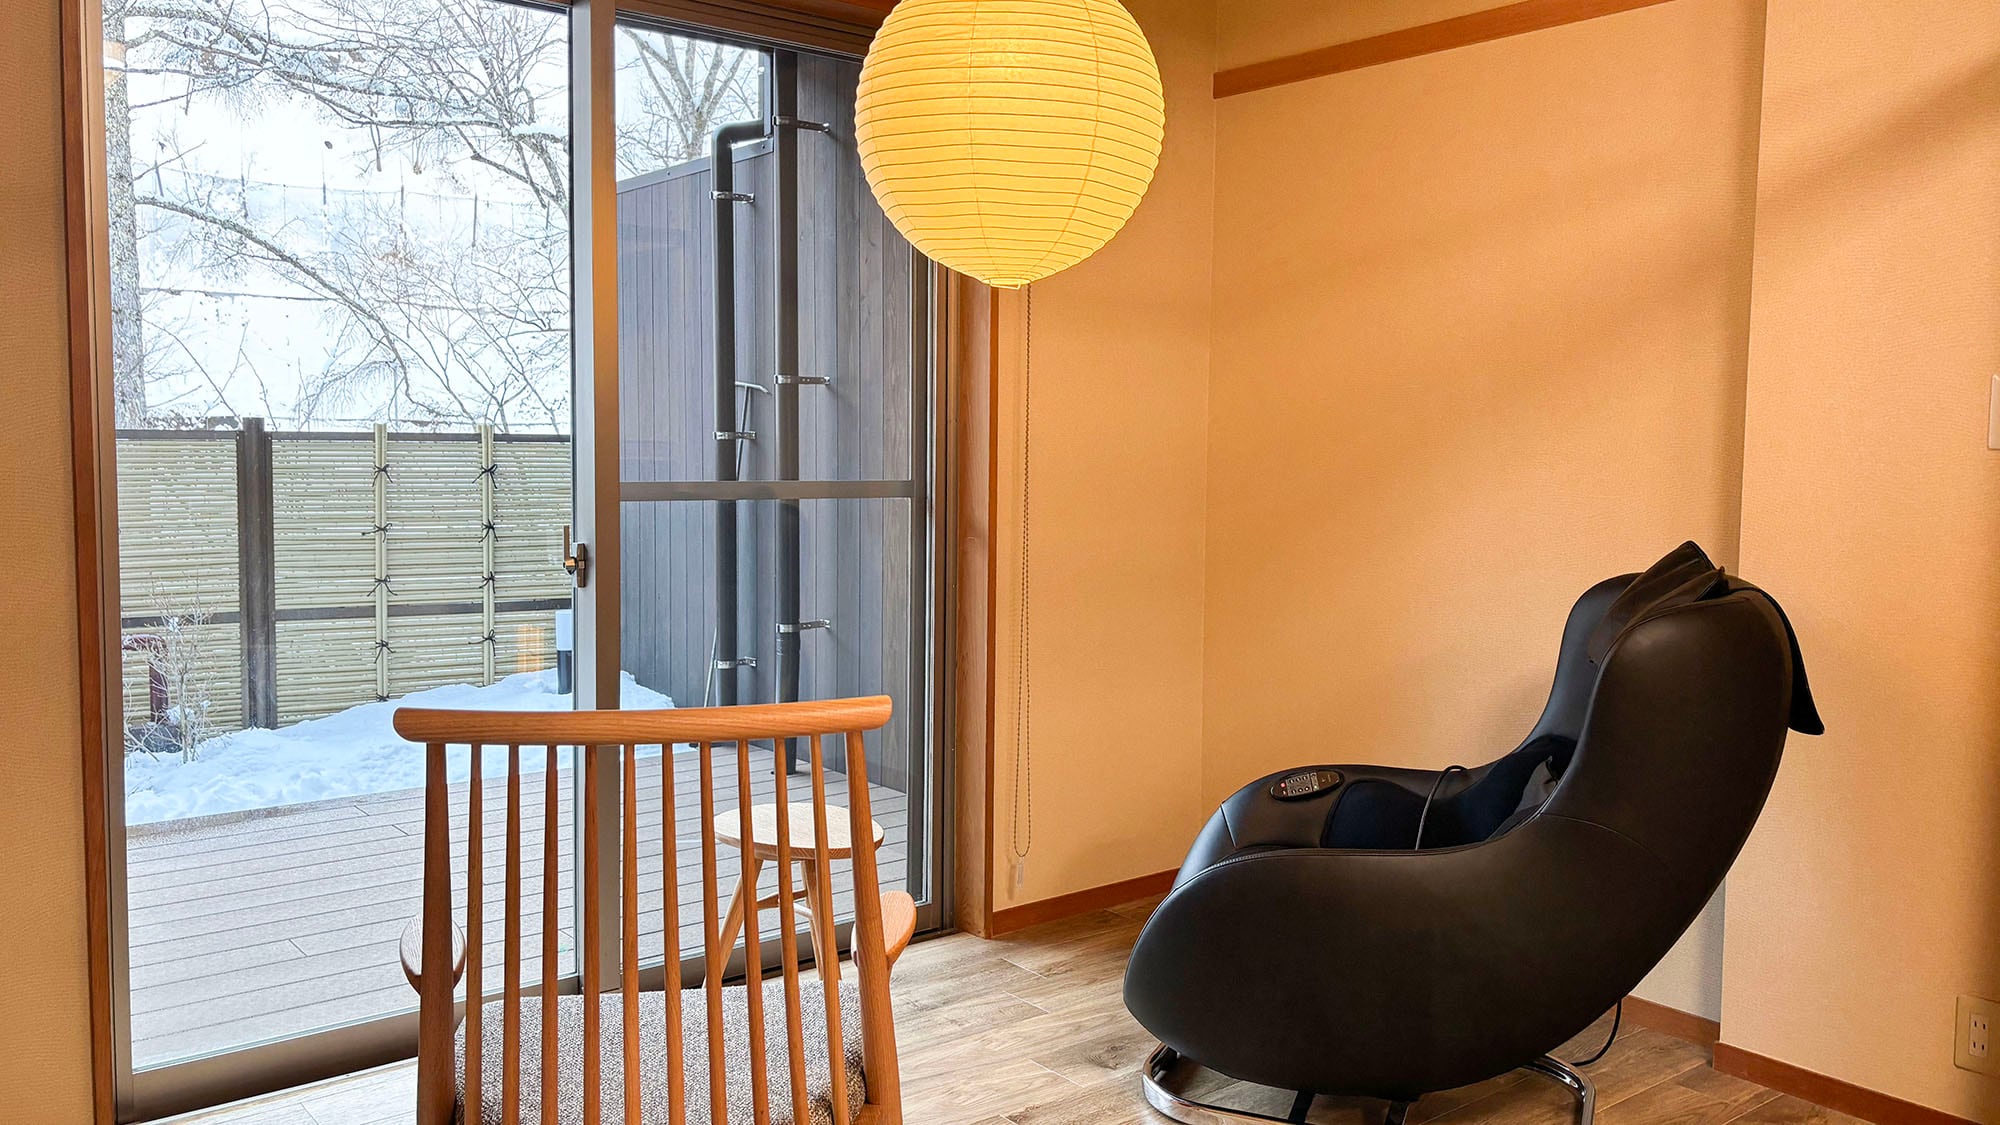 ・[Japanese-style room on the 1st floor] Relax on the massage chair while looking at the outside scenery